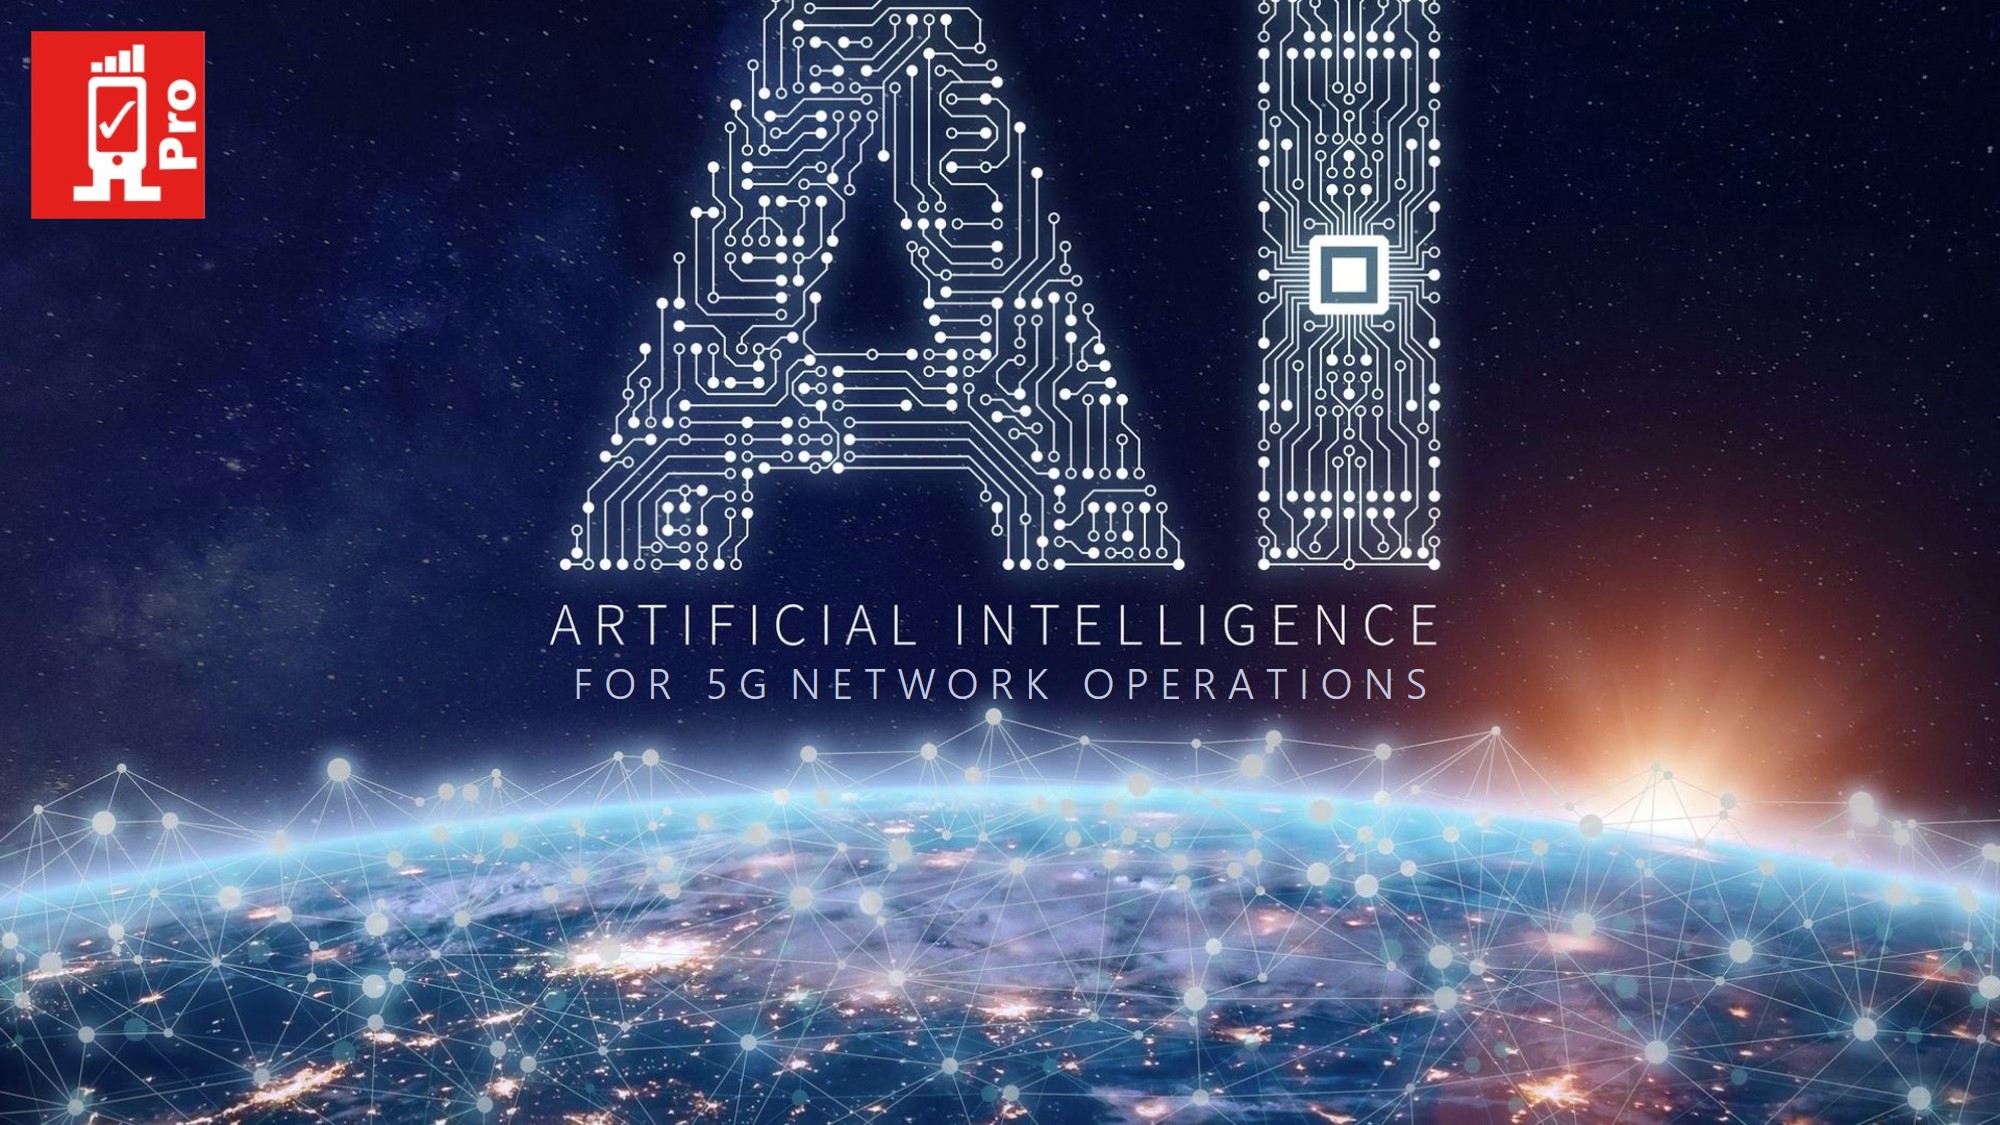 ai-for-5g-network-operations.jpg